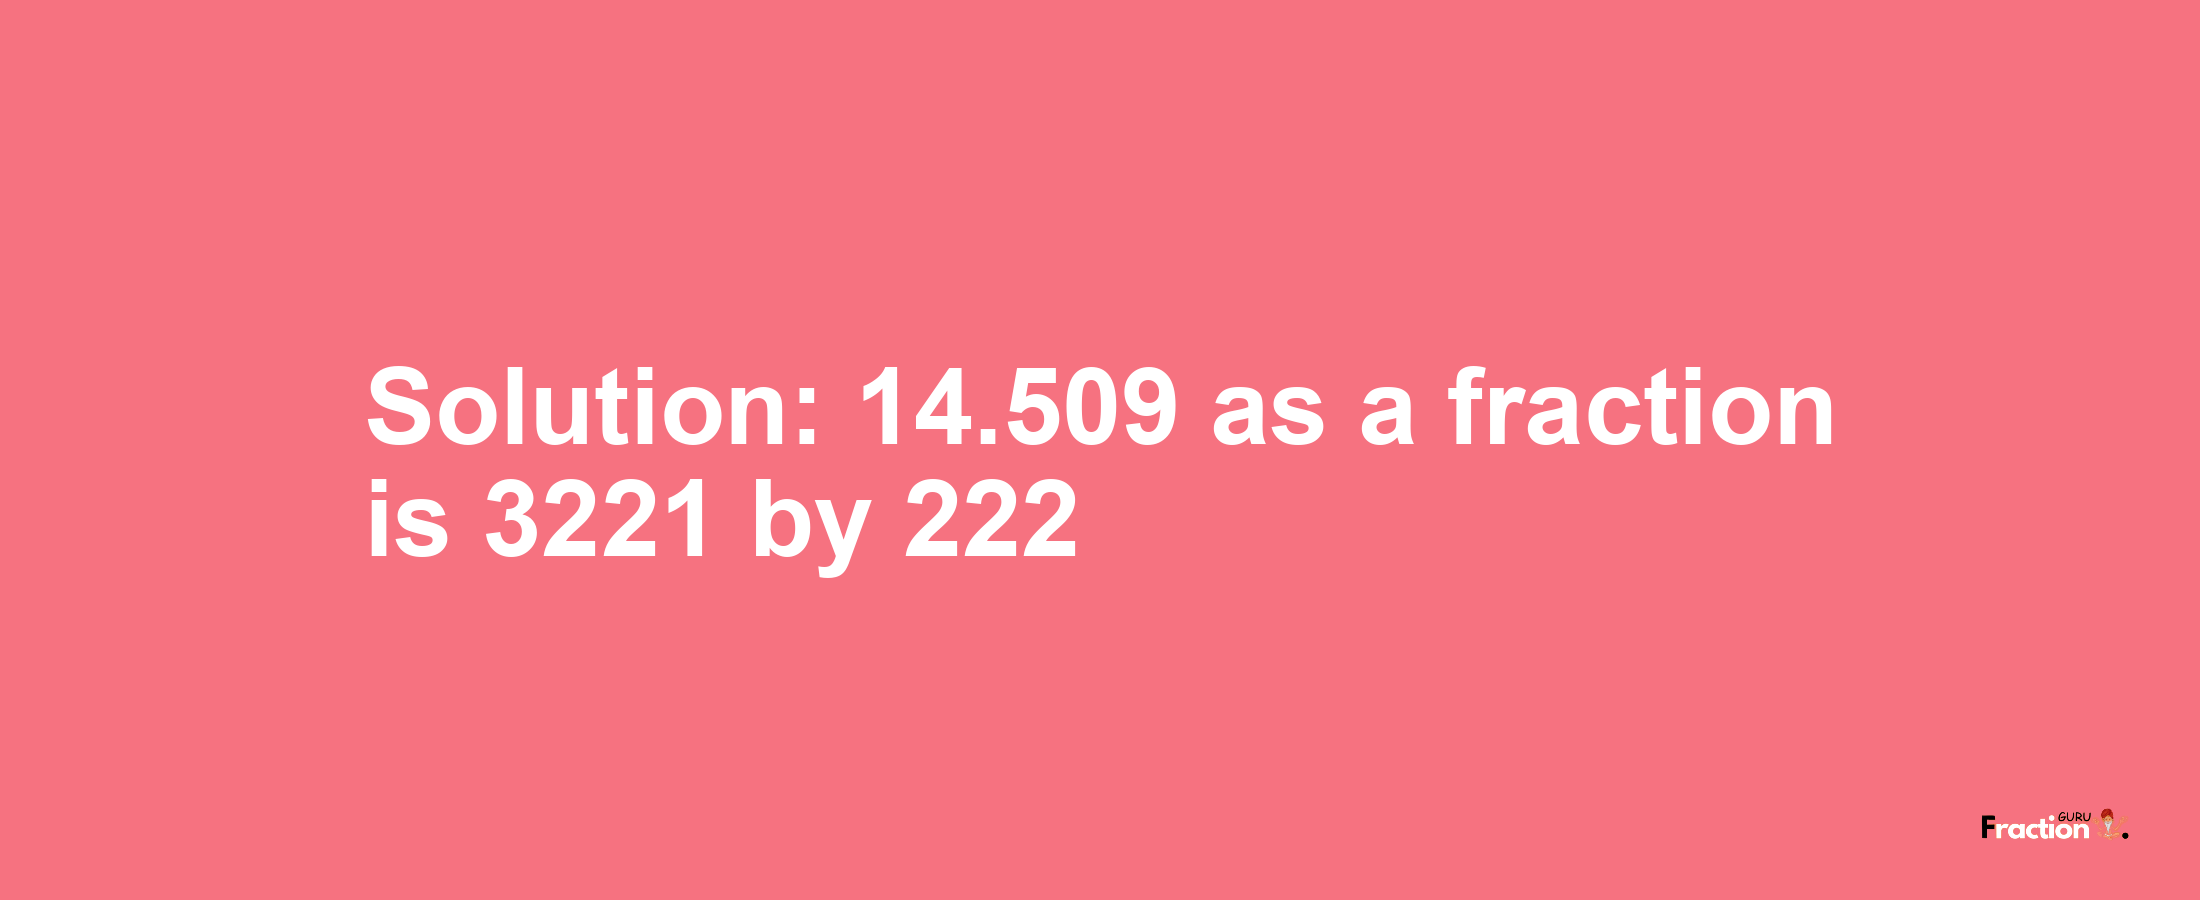 Solution:14.509 as a fraction is 3221/222